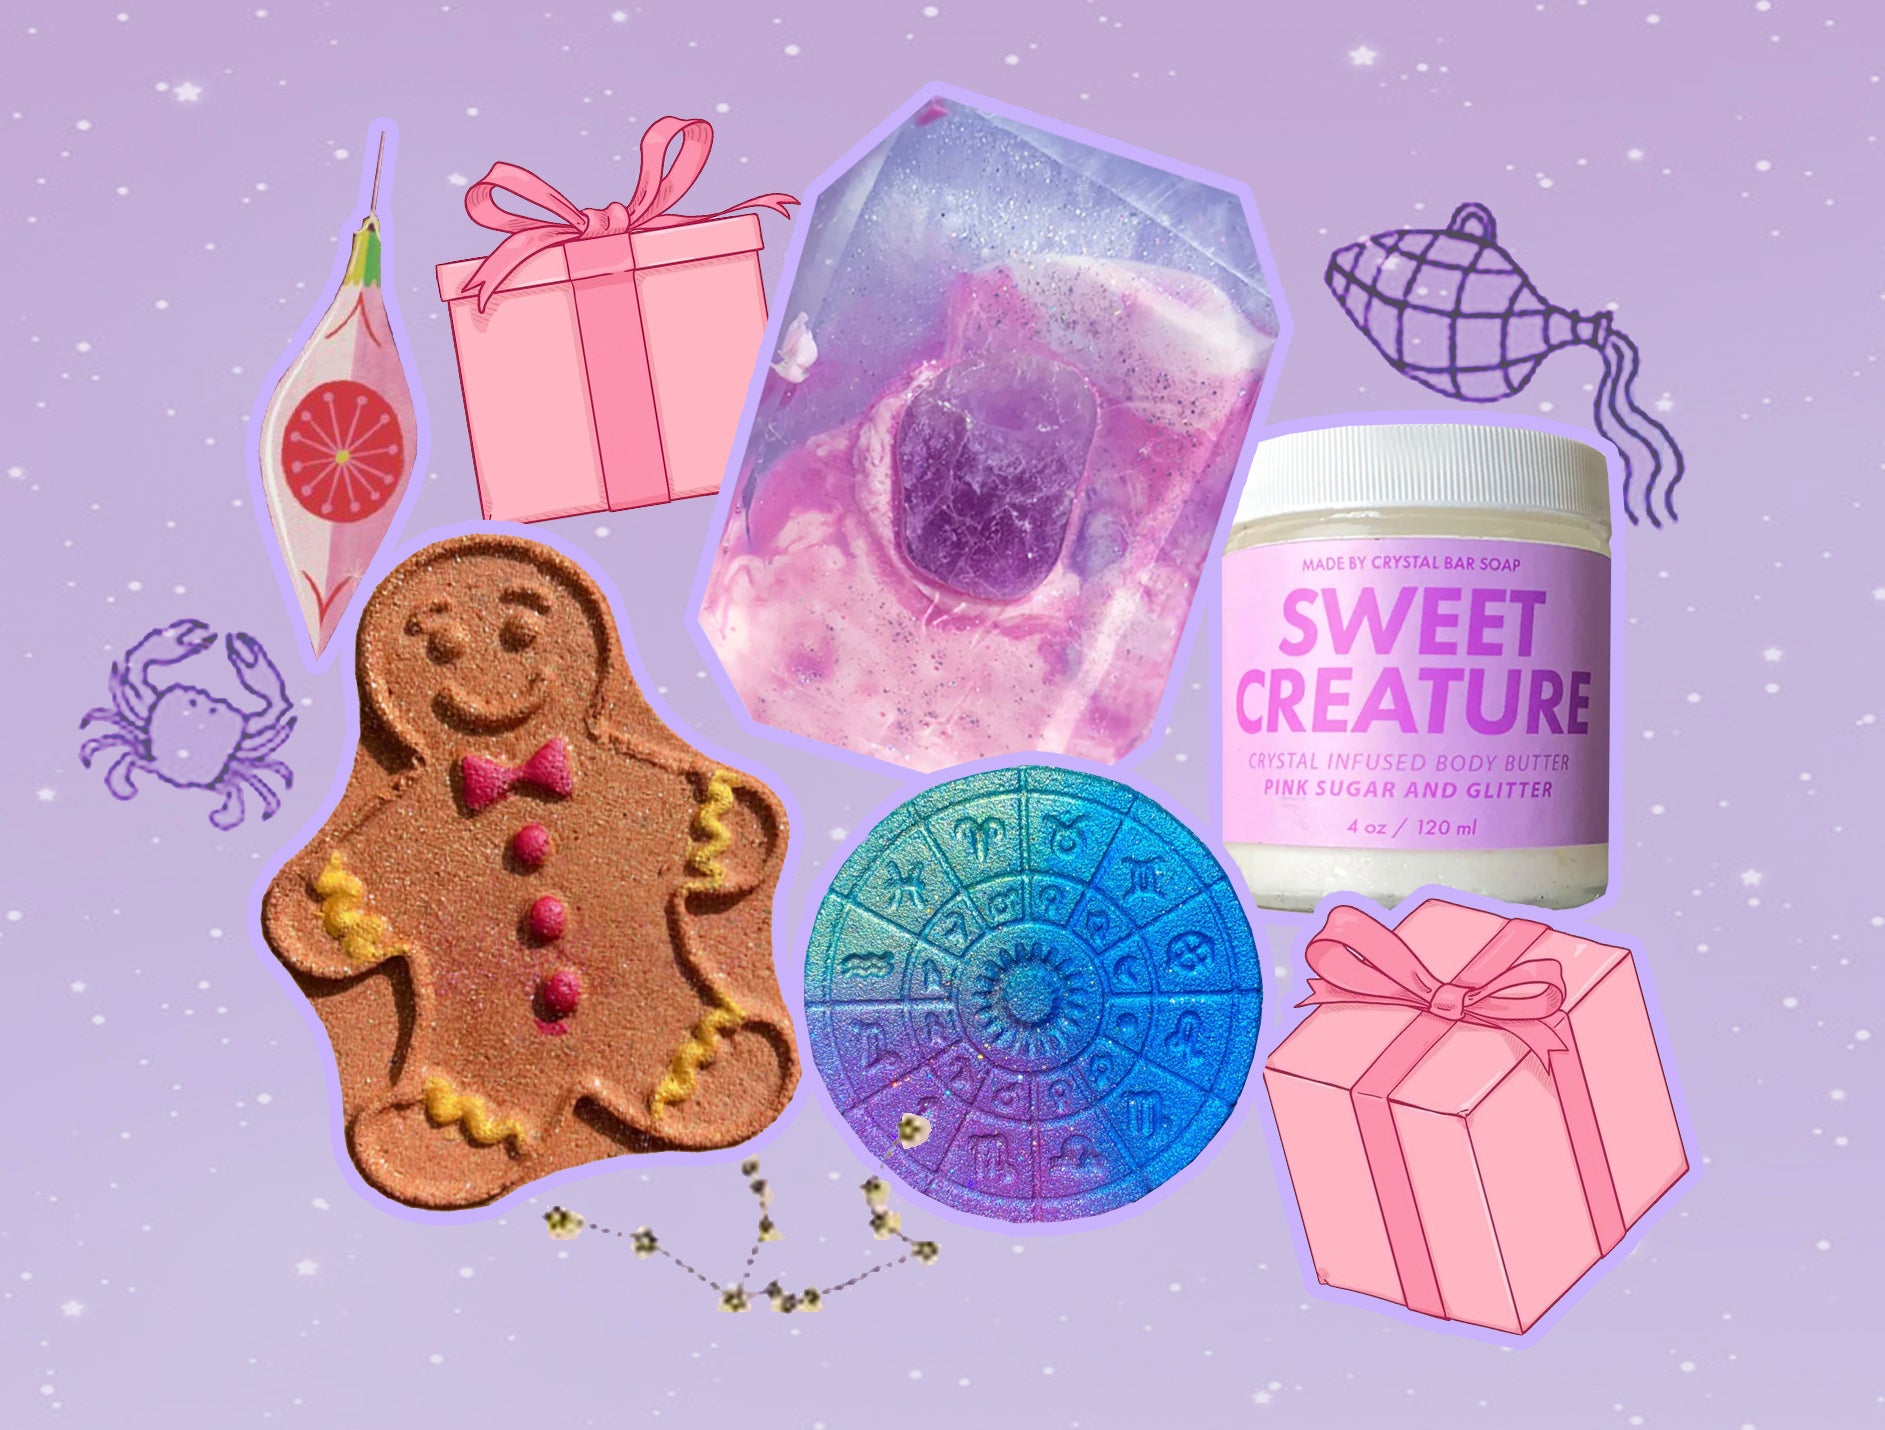 Look No Further Astrology Girls: These Are the Best Gifts for Each Zodiac Sign